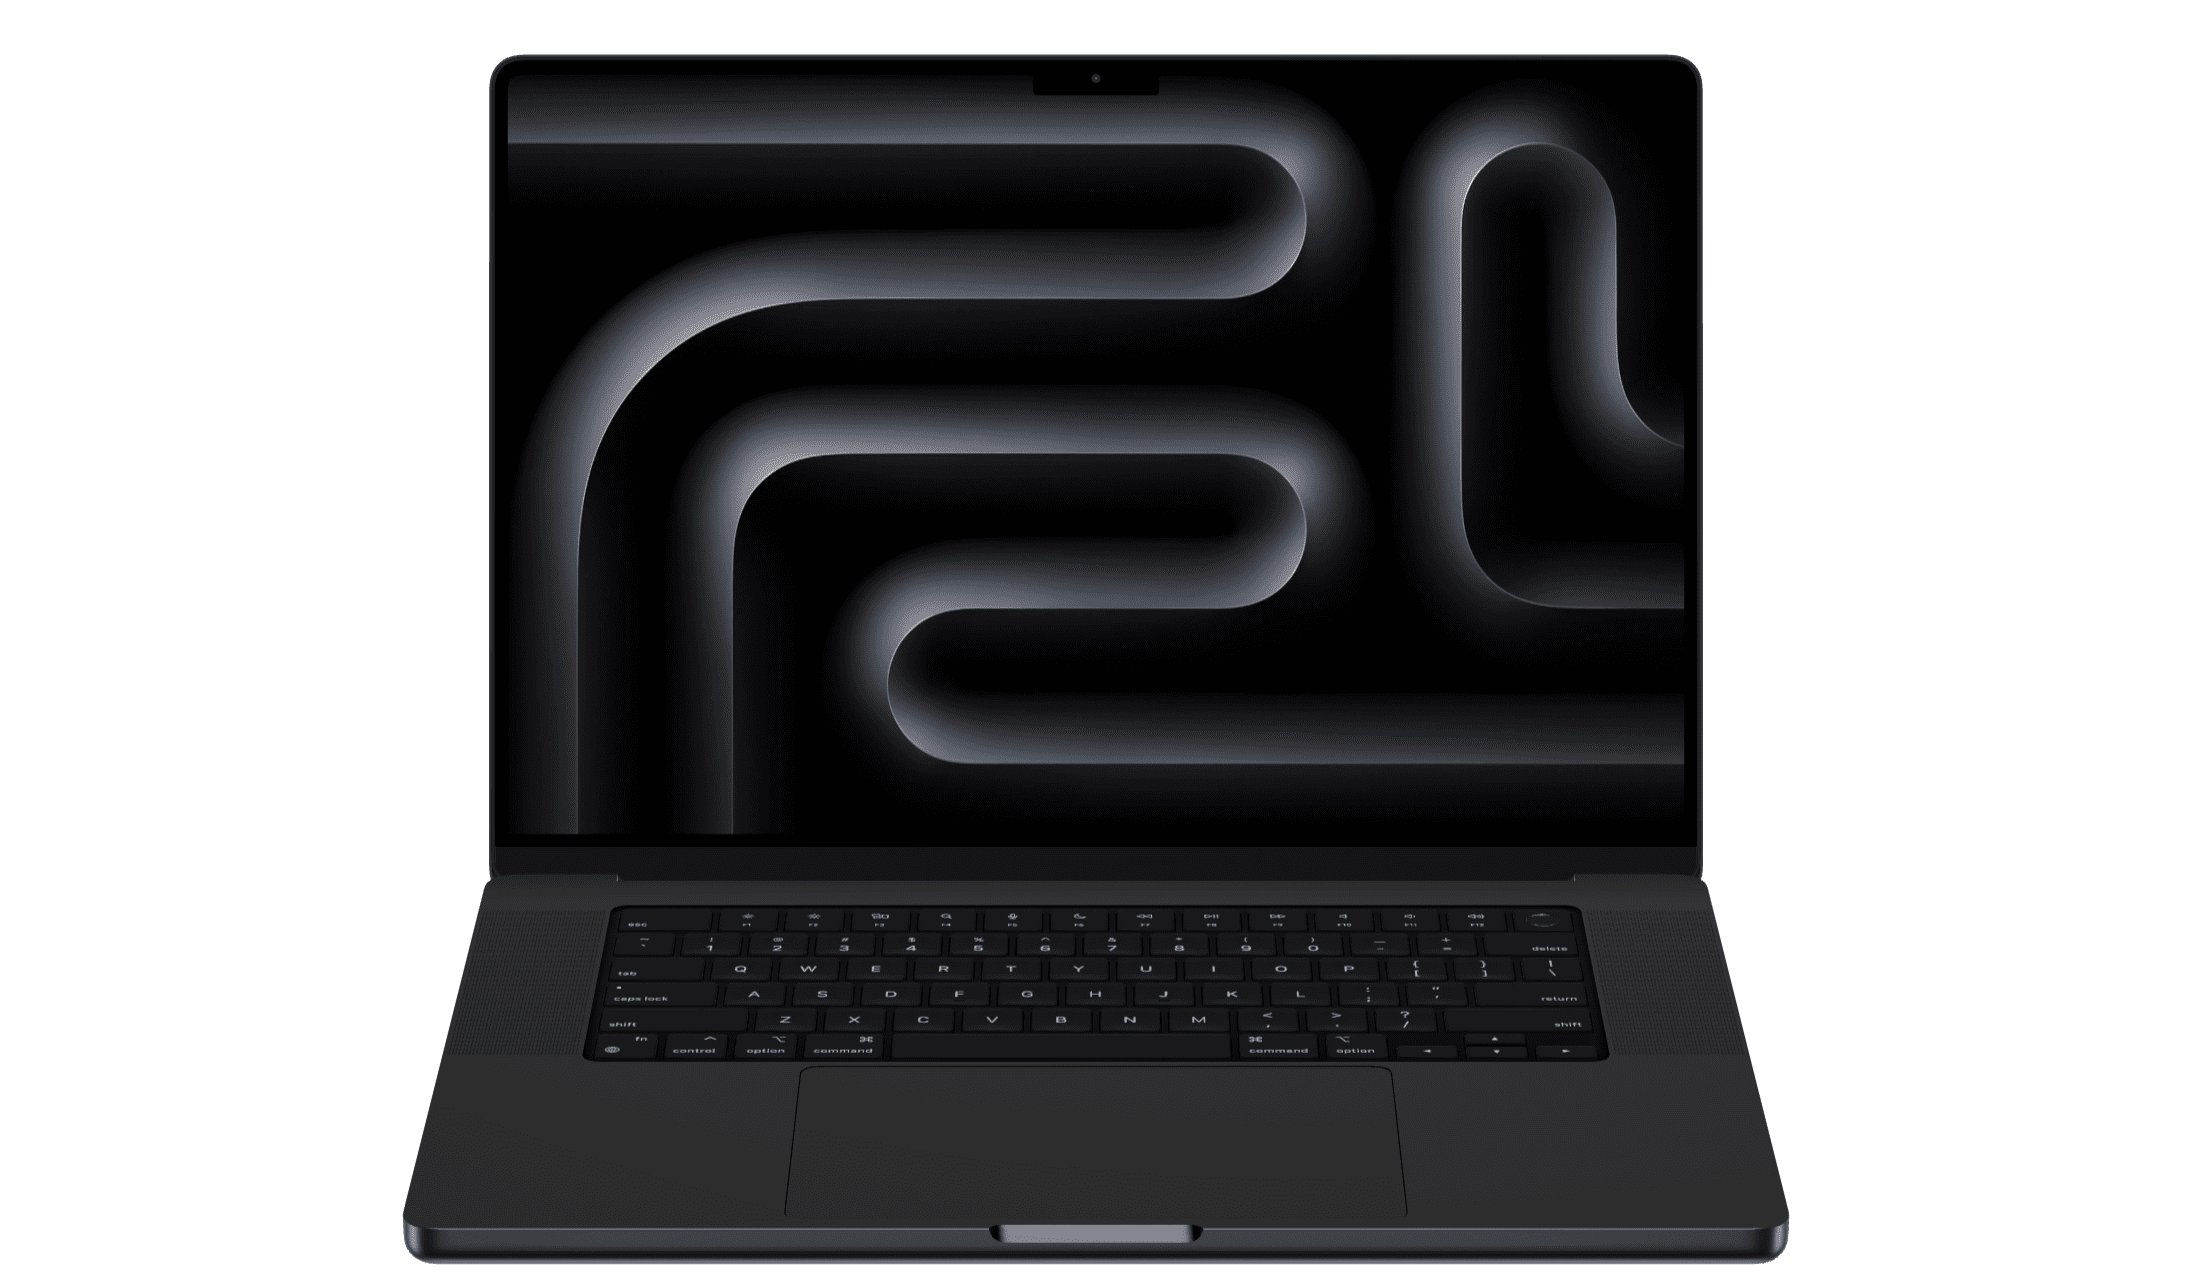 M3 MacBook Pro in Space Black with its lid open